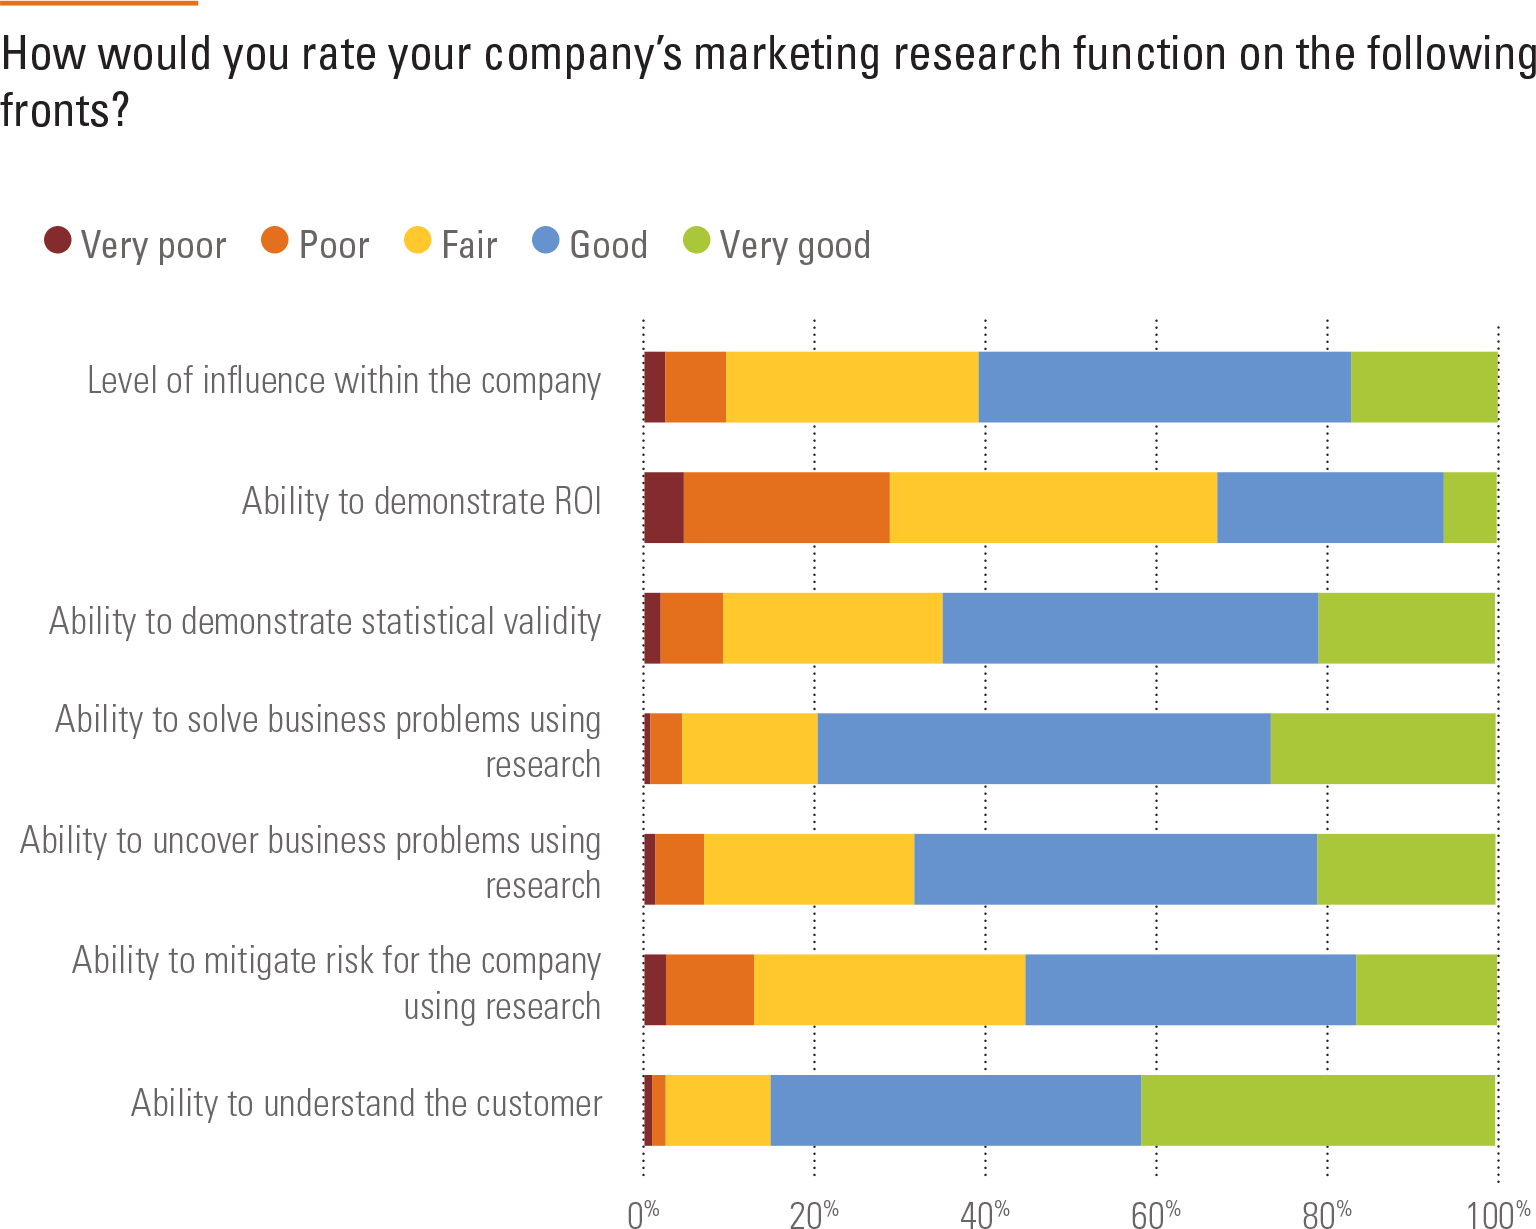 How would you rate your company’s marketing research function on the following fronts?